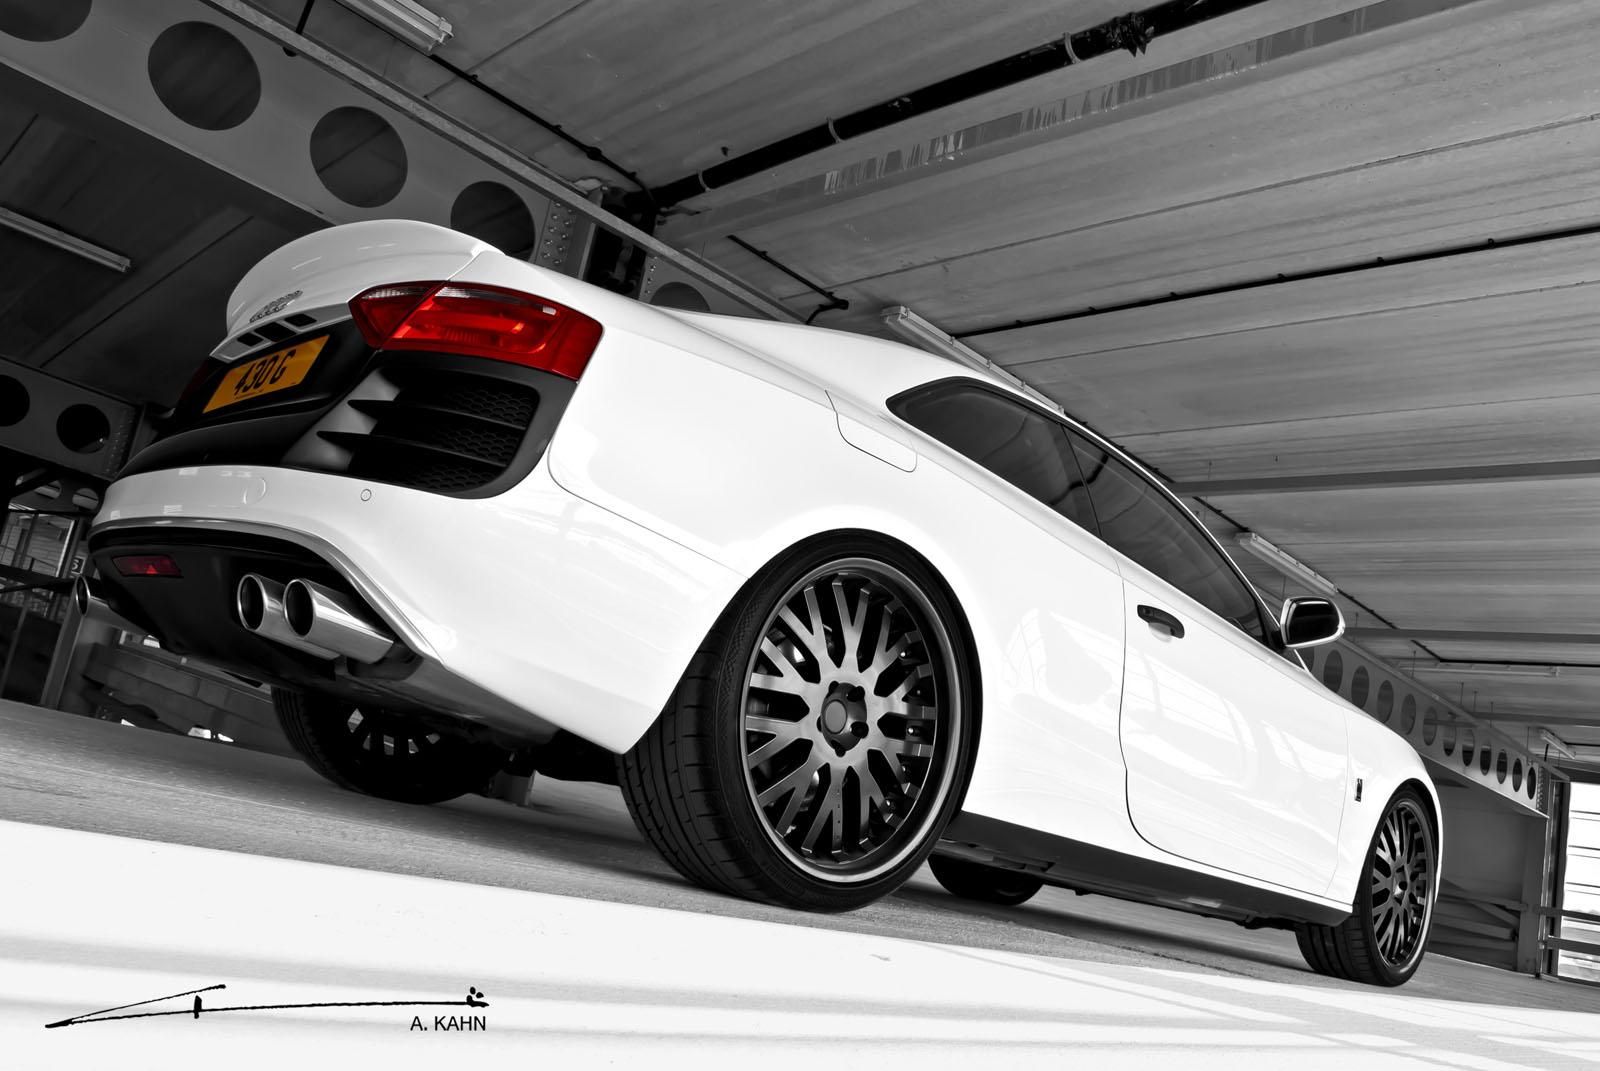 2011 Audi A5 by Project Kahn